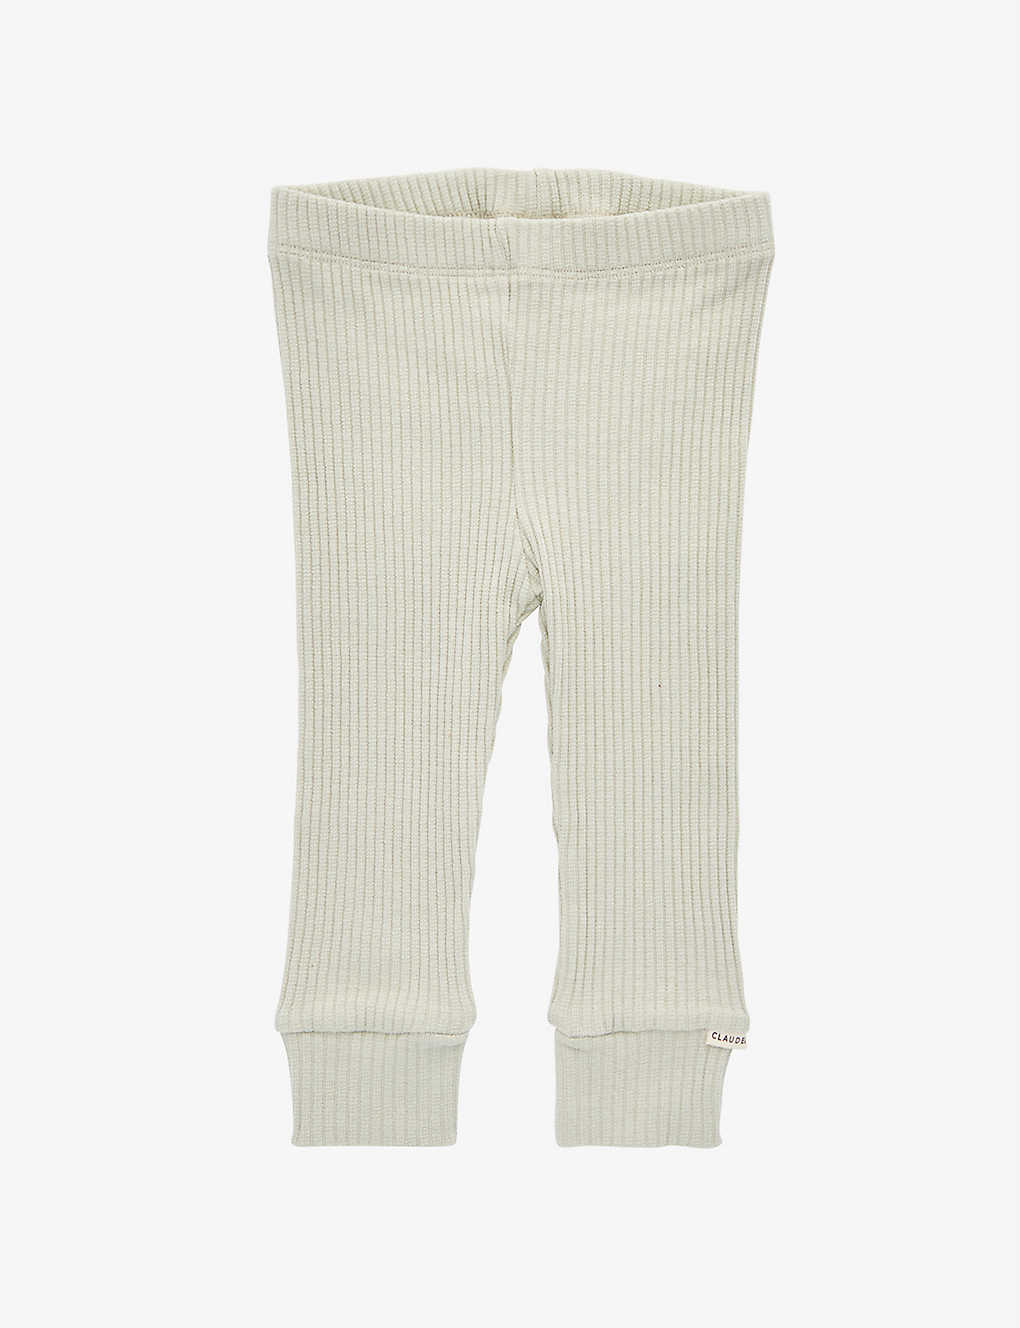 Claude & Co. Babies' Ribbed Cuffed Organic Cotton-blend Leggings 0-12 Months In Pale Green